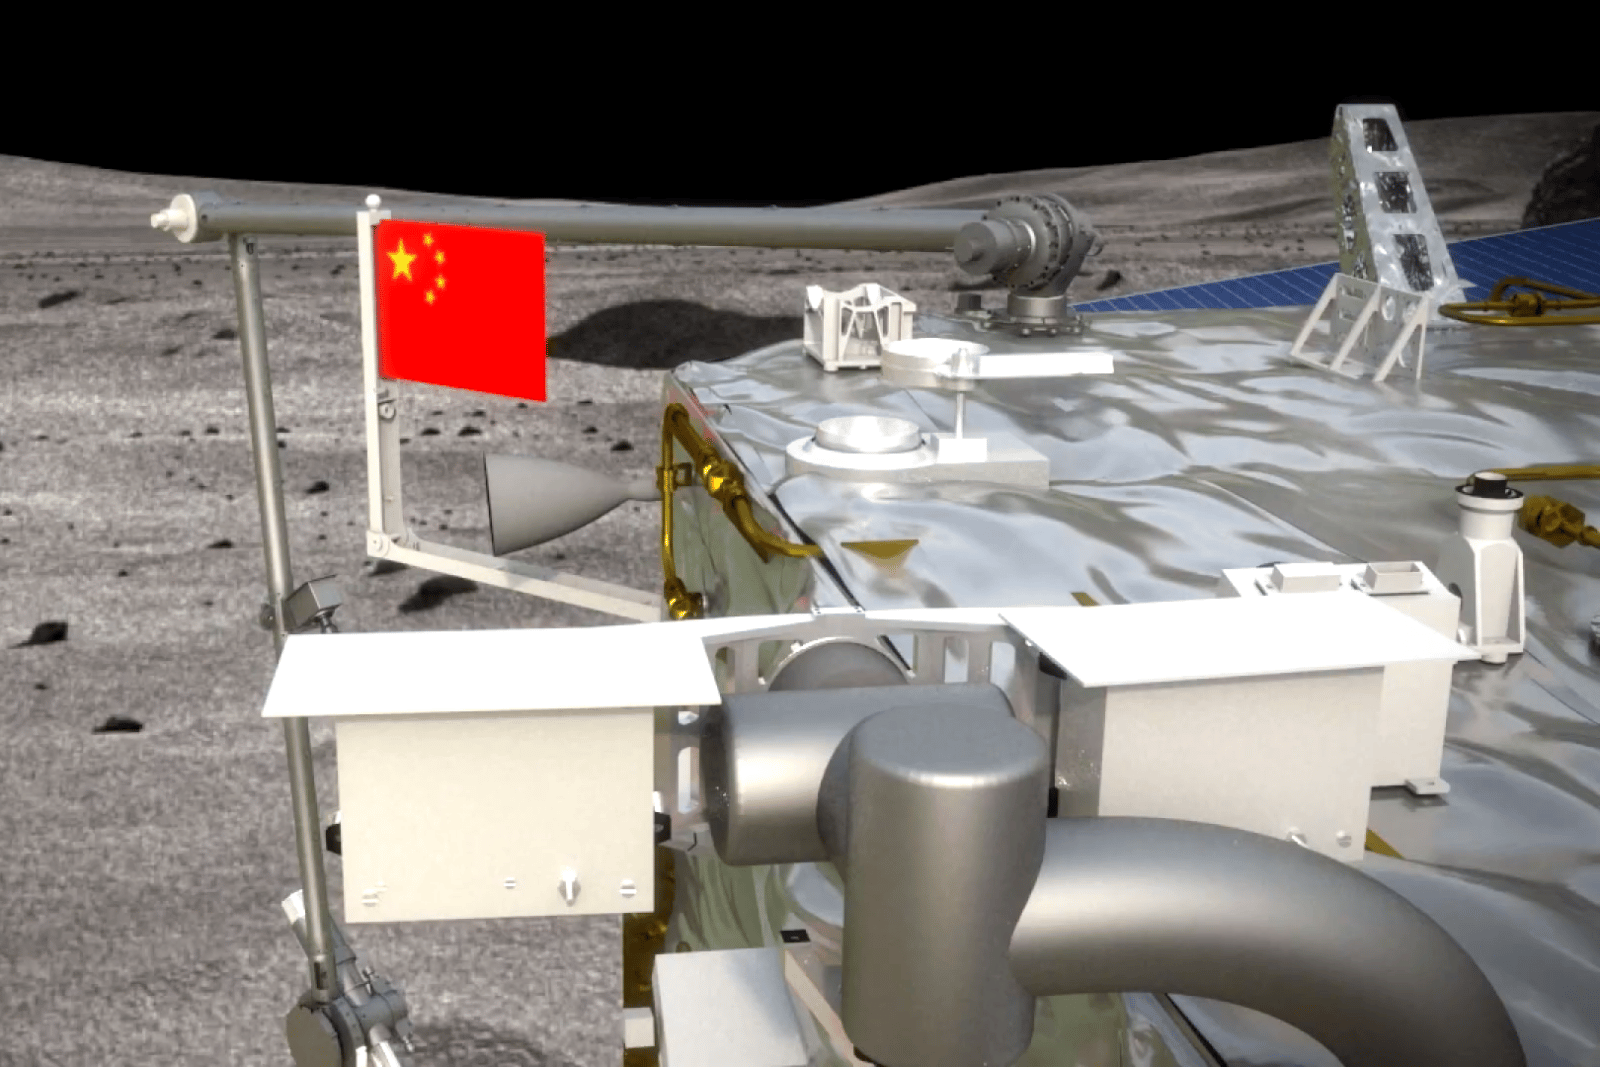 Water on the moon surface? China has all the proof